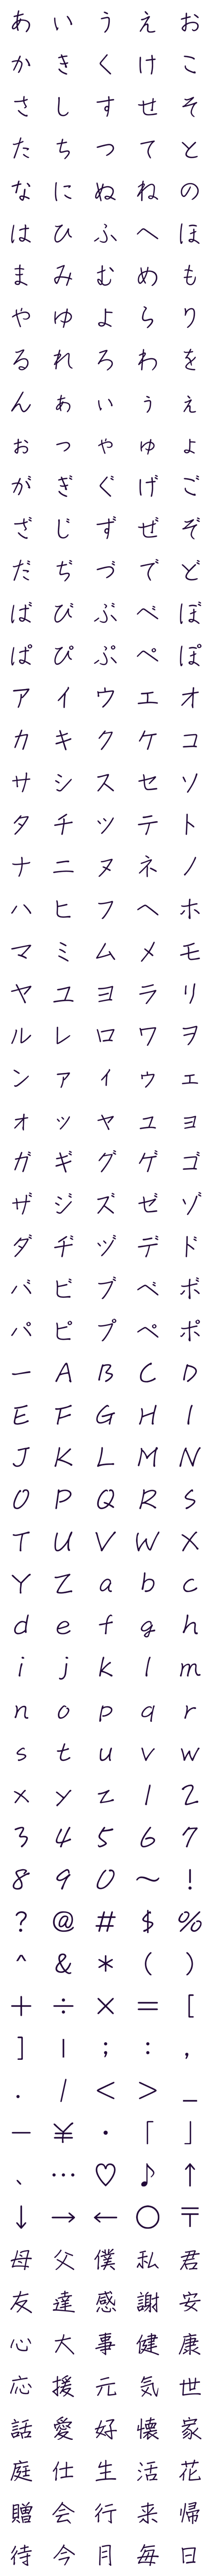 [LINE絵文字]DFてがき角 フォント絵文字の画像一覧